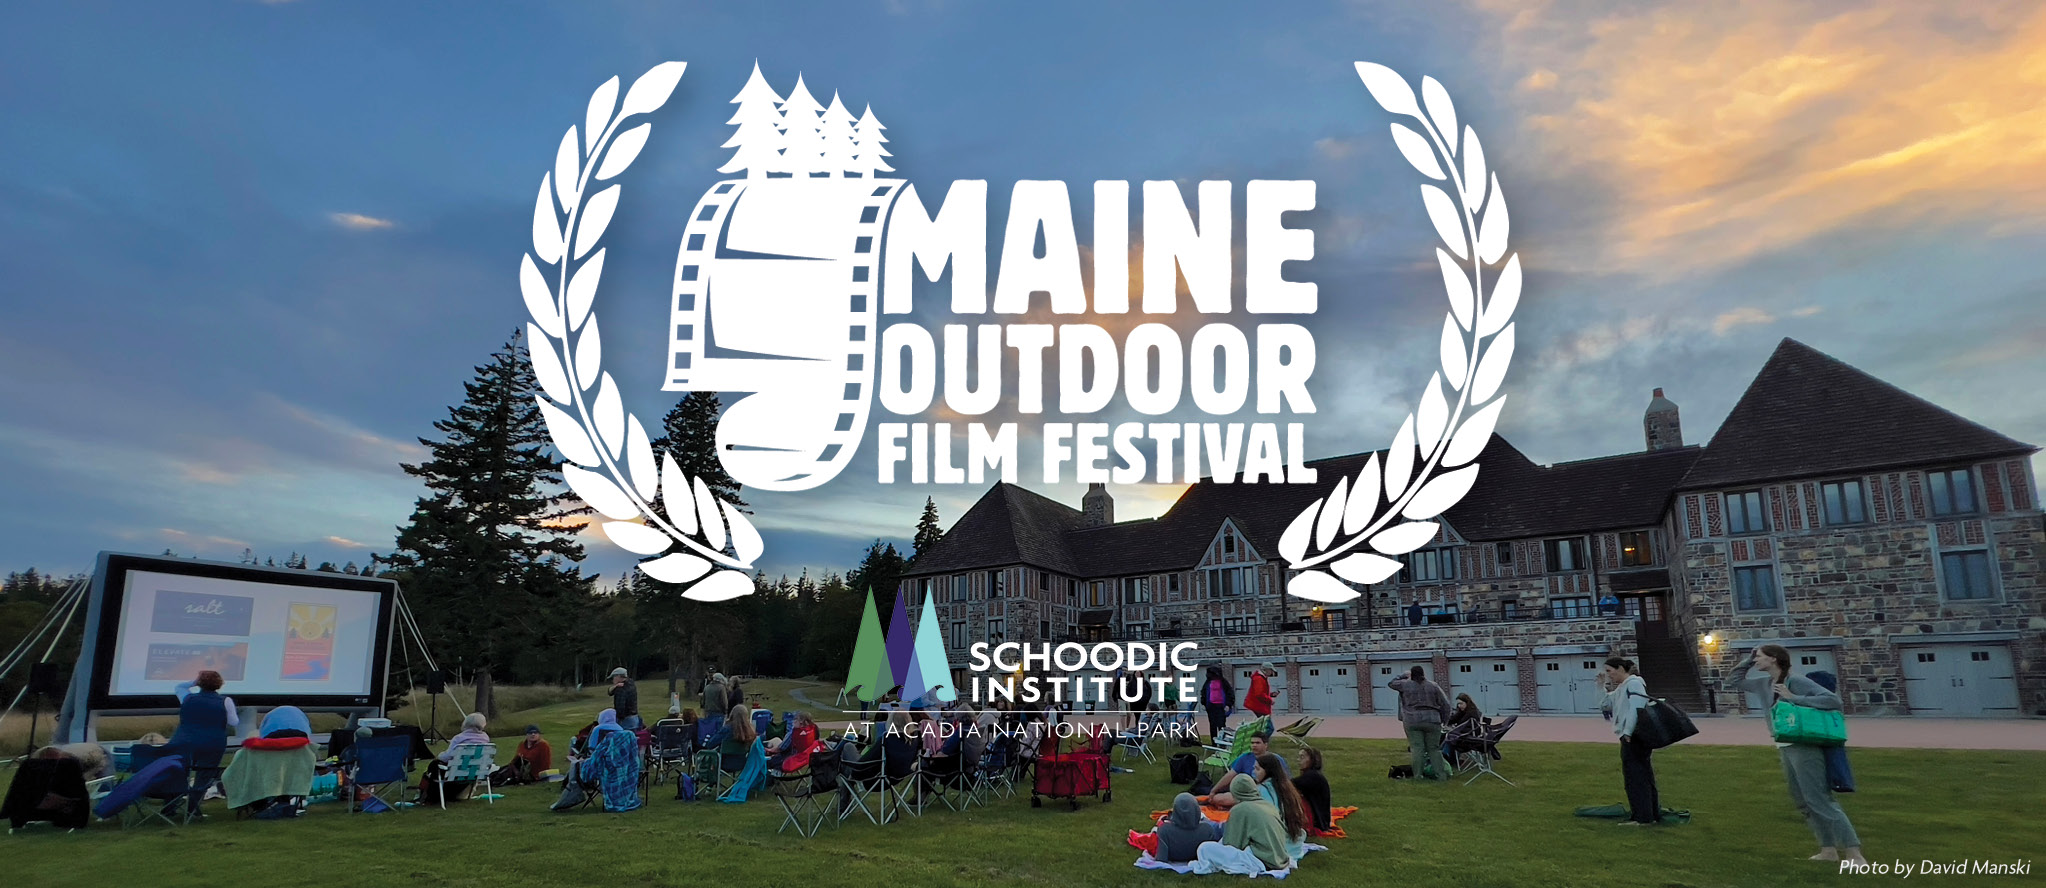 Banner image showing the Maine Outdoor Film Festival (MOFF) logo in all white, overlaid on a photo of an outdoor audience at a MOFF event. The sun is setting in the background and the Schoodic Institute logo is shown at the bottom of the image.